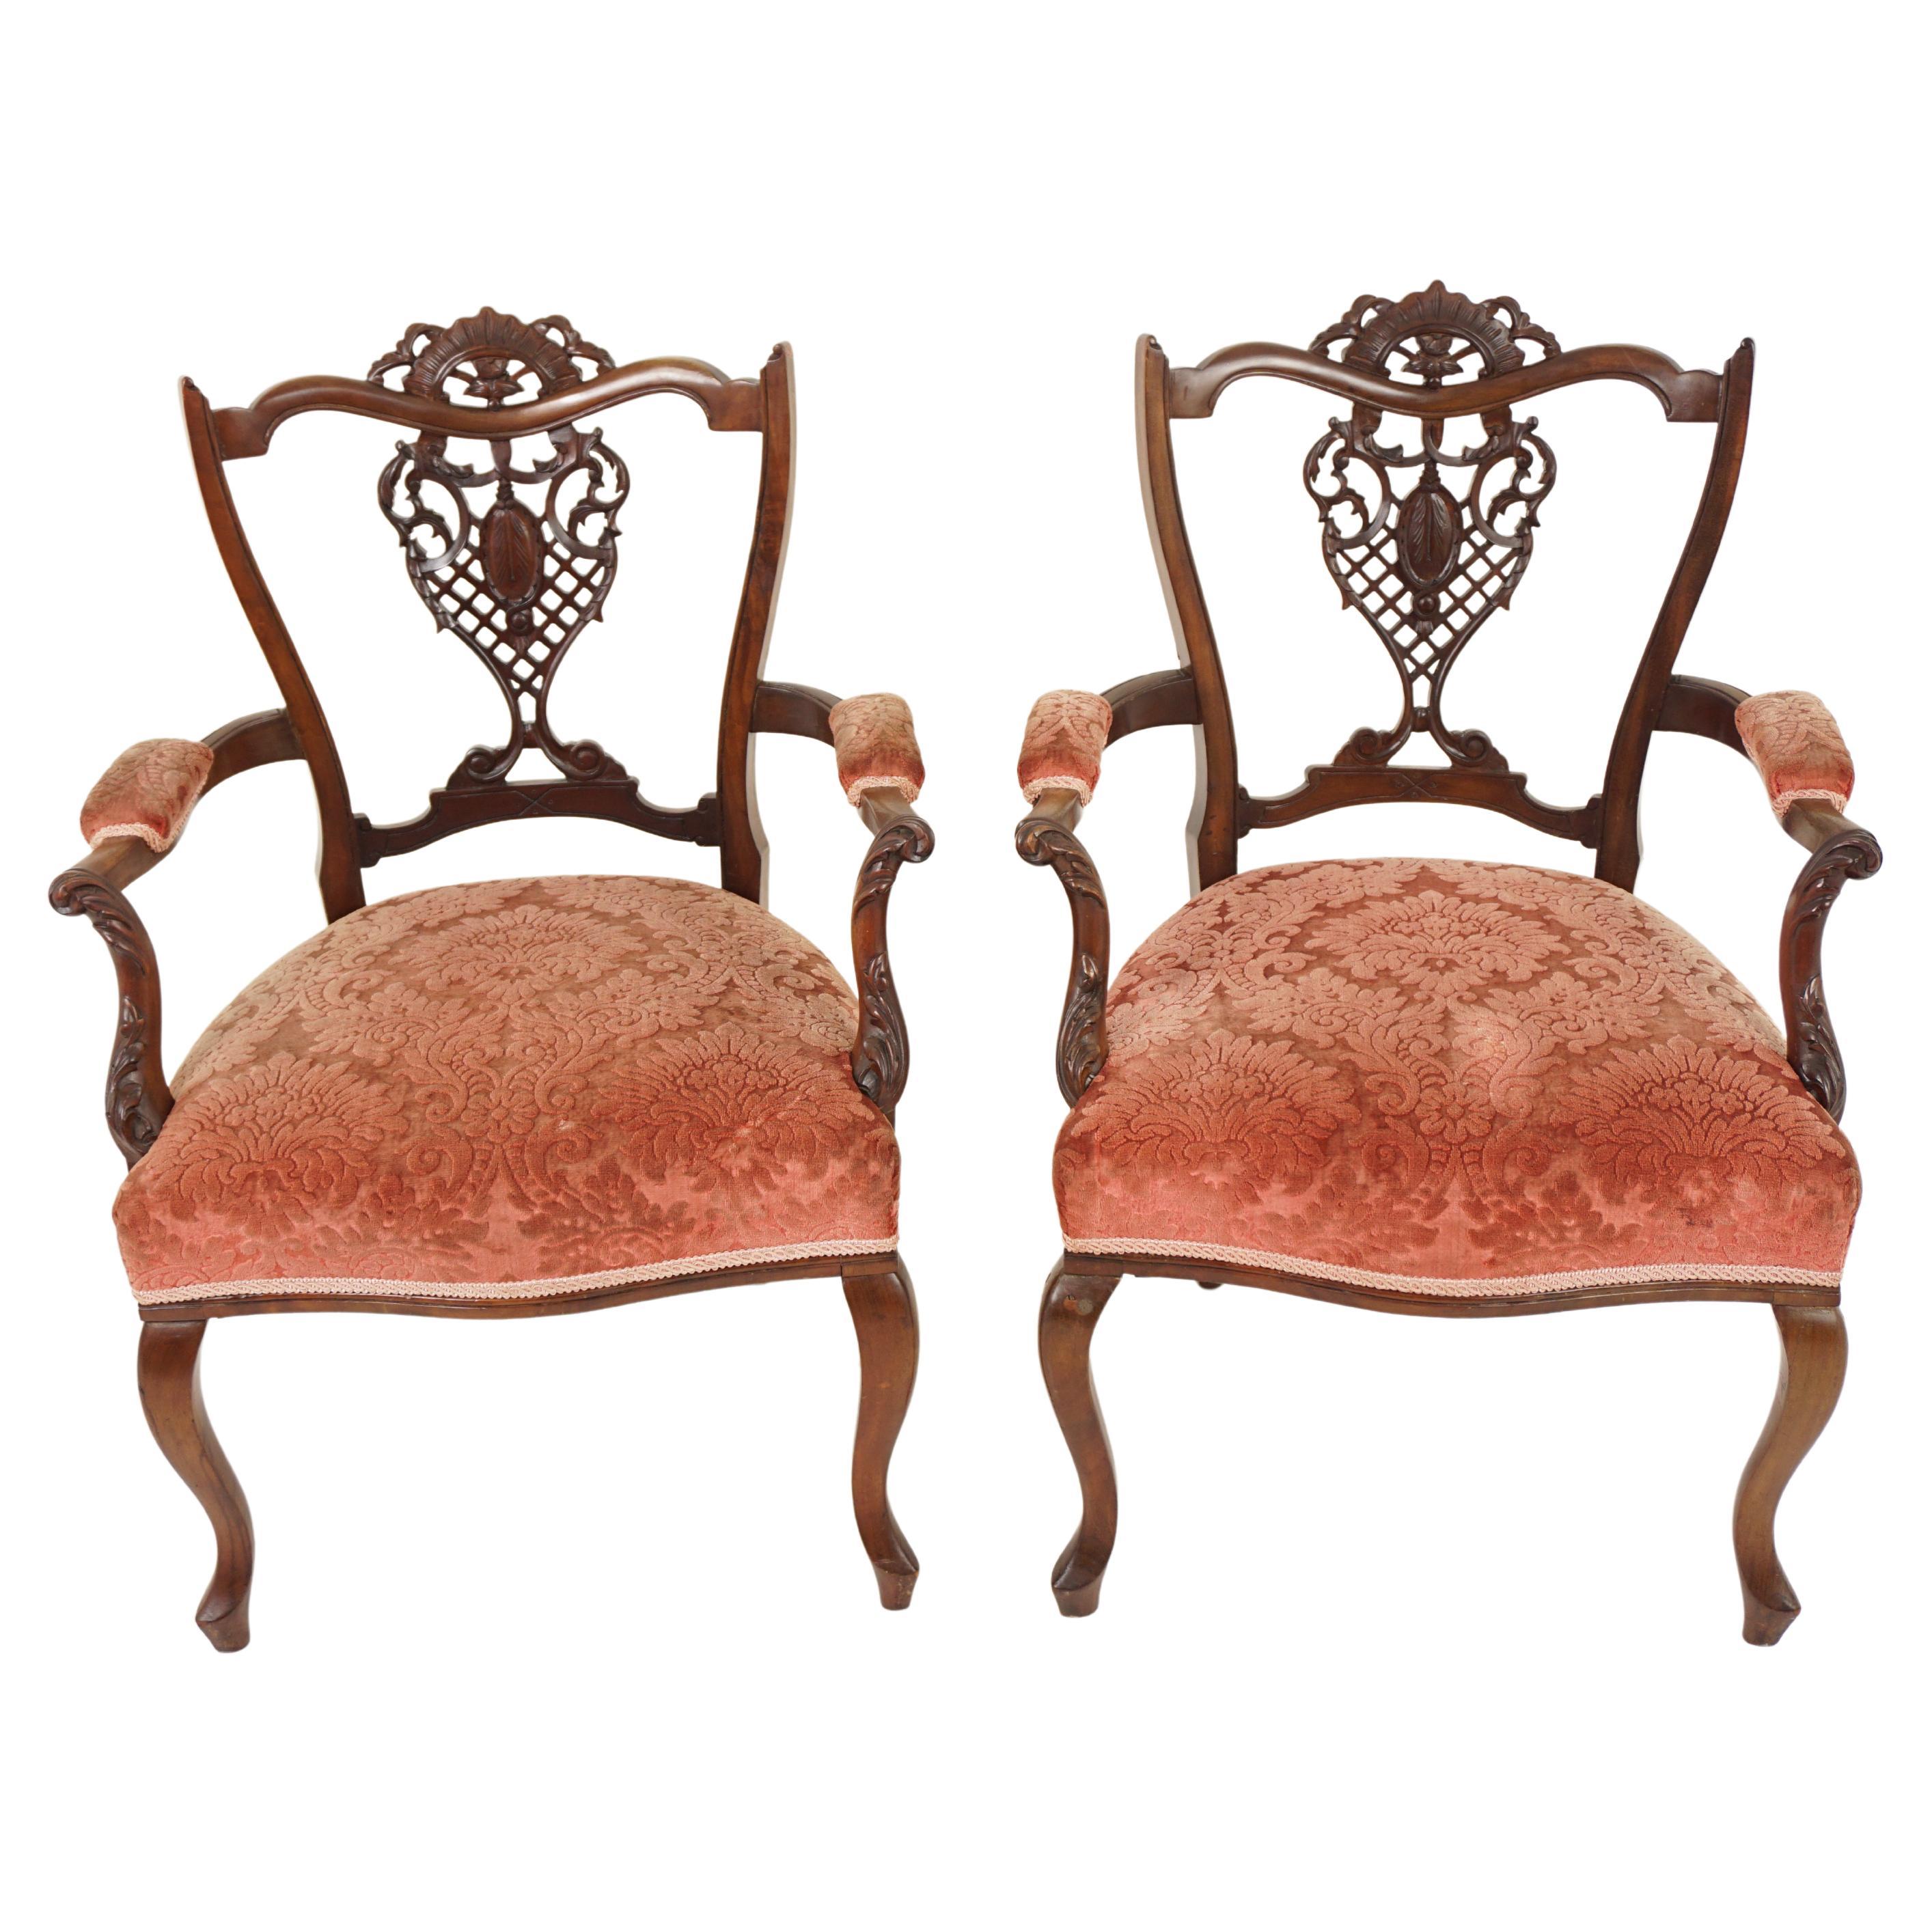 Antique Walnut Chairs, Pair of Edwardian Carved Arm Chairs, Scotland 1900, H983 For Sale